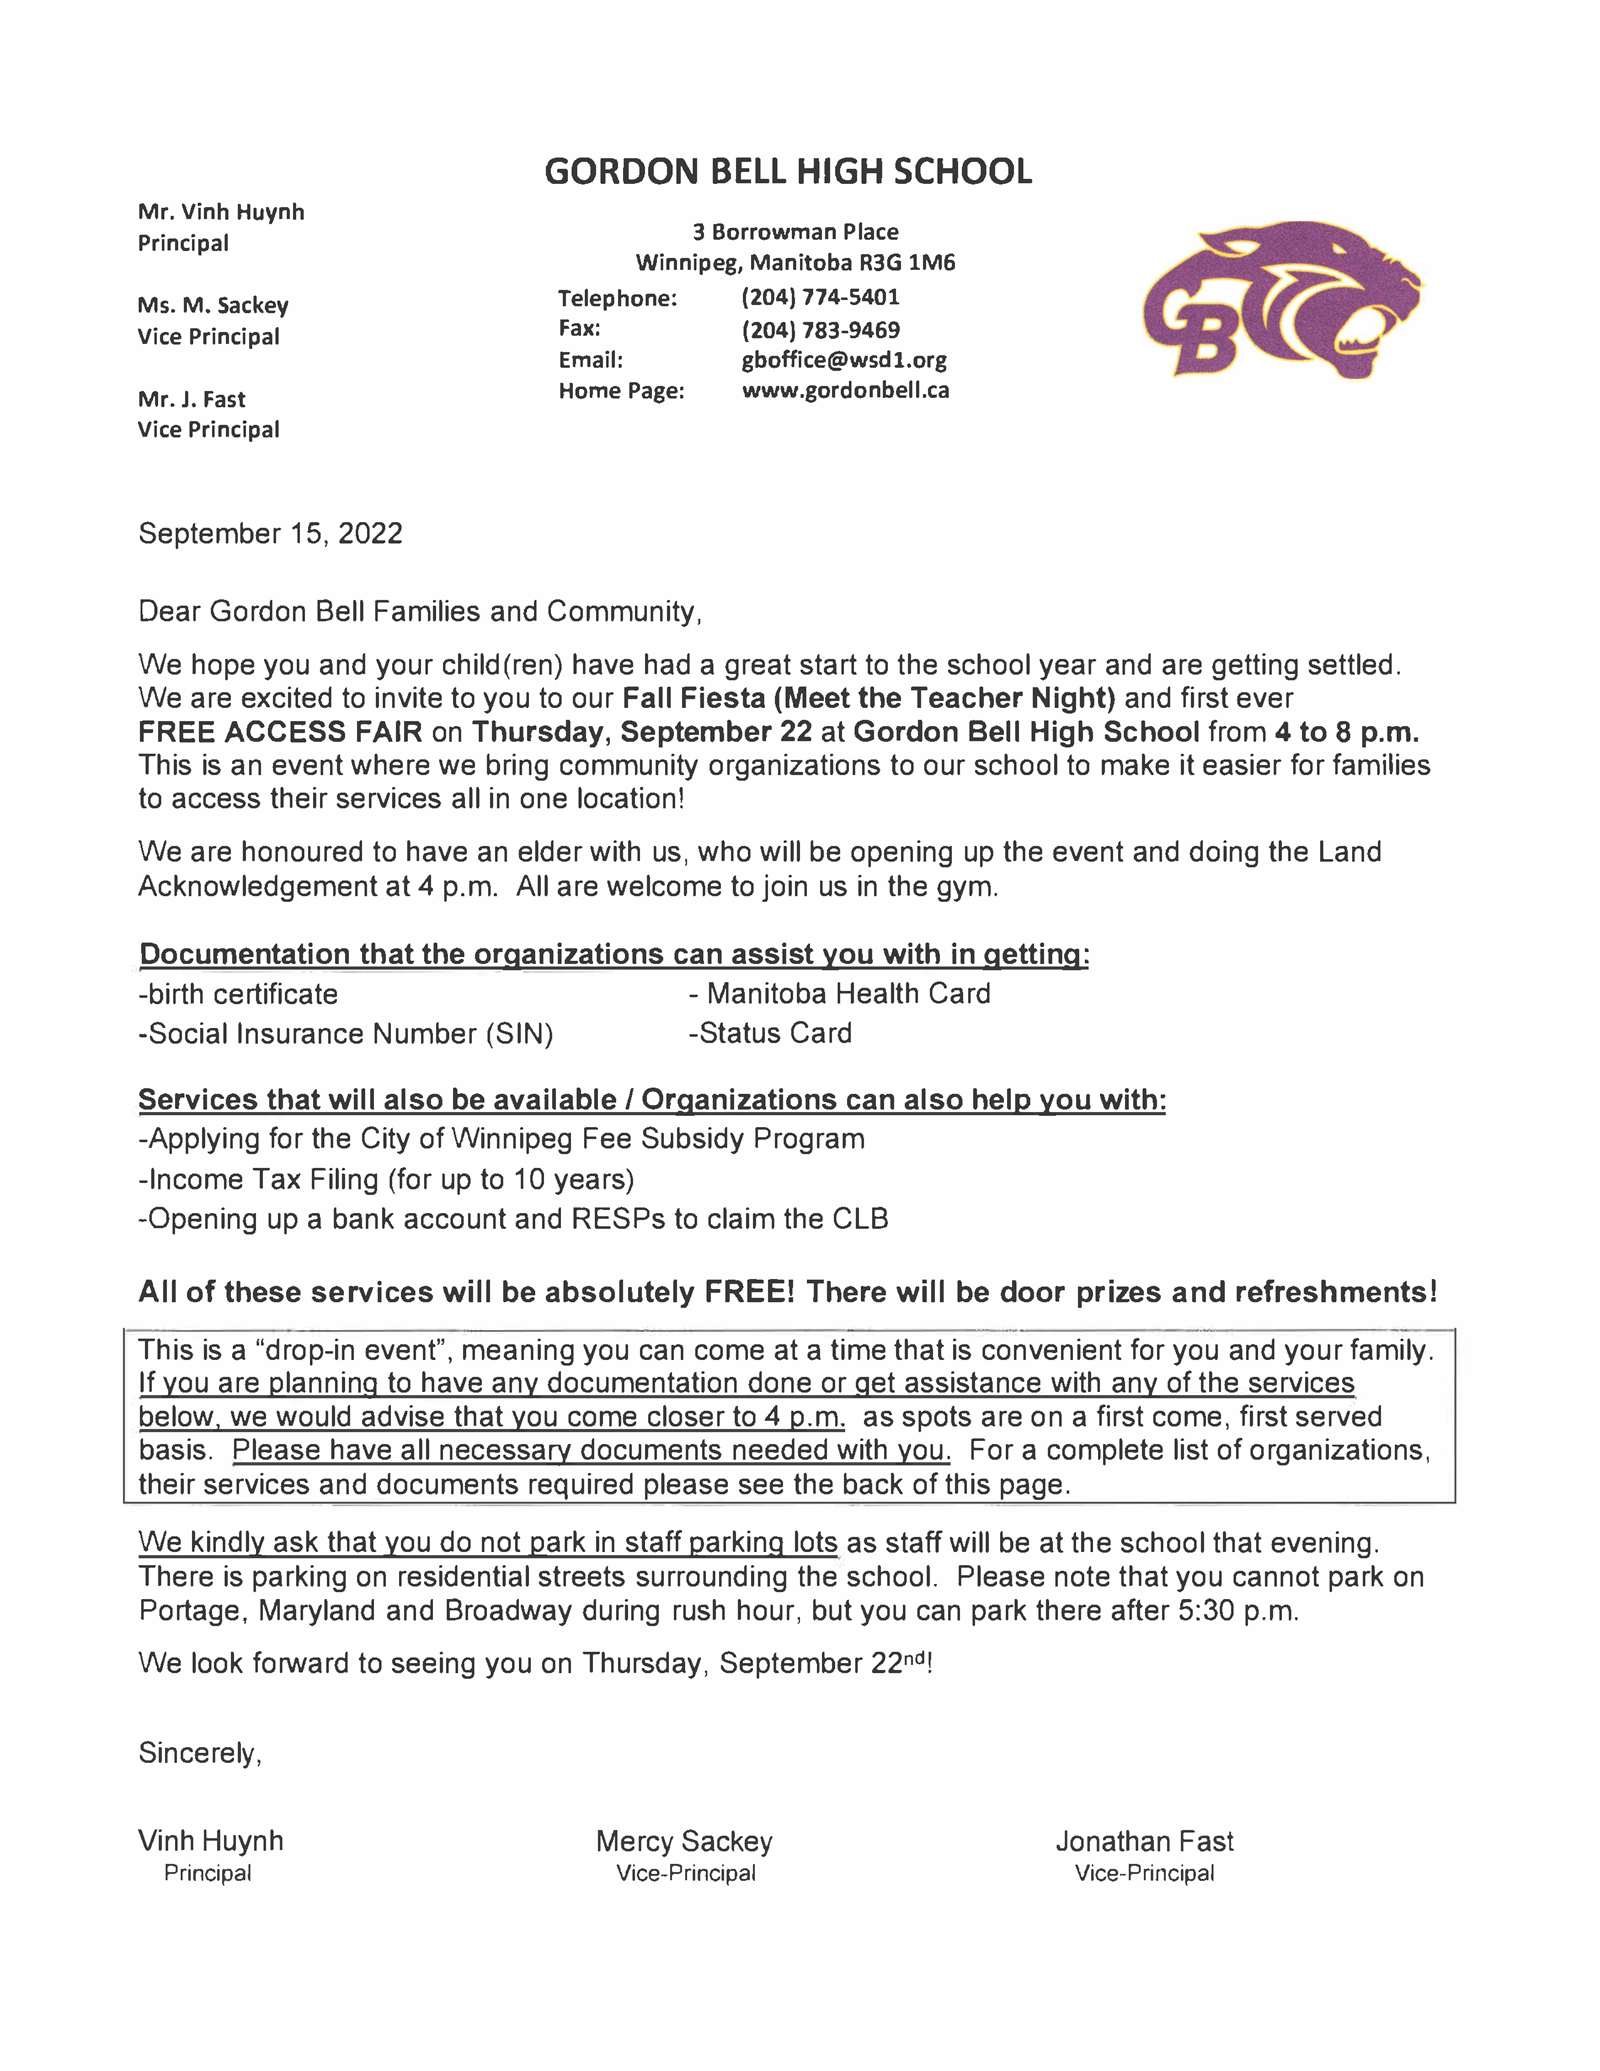 Access-Fair-Letter-to-Community-2022_Page_1.png